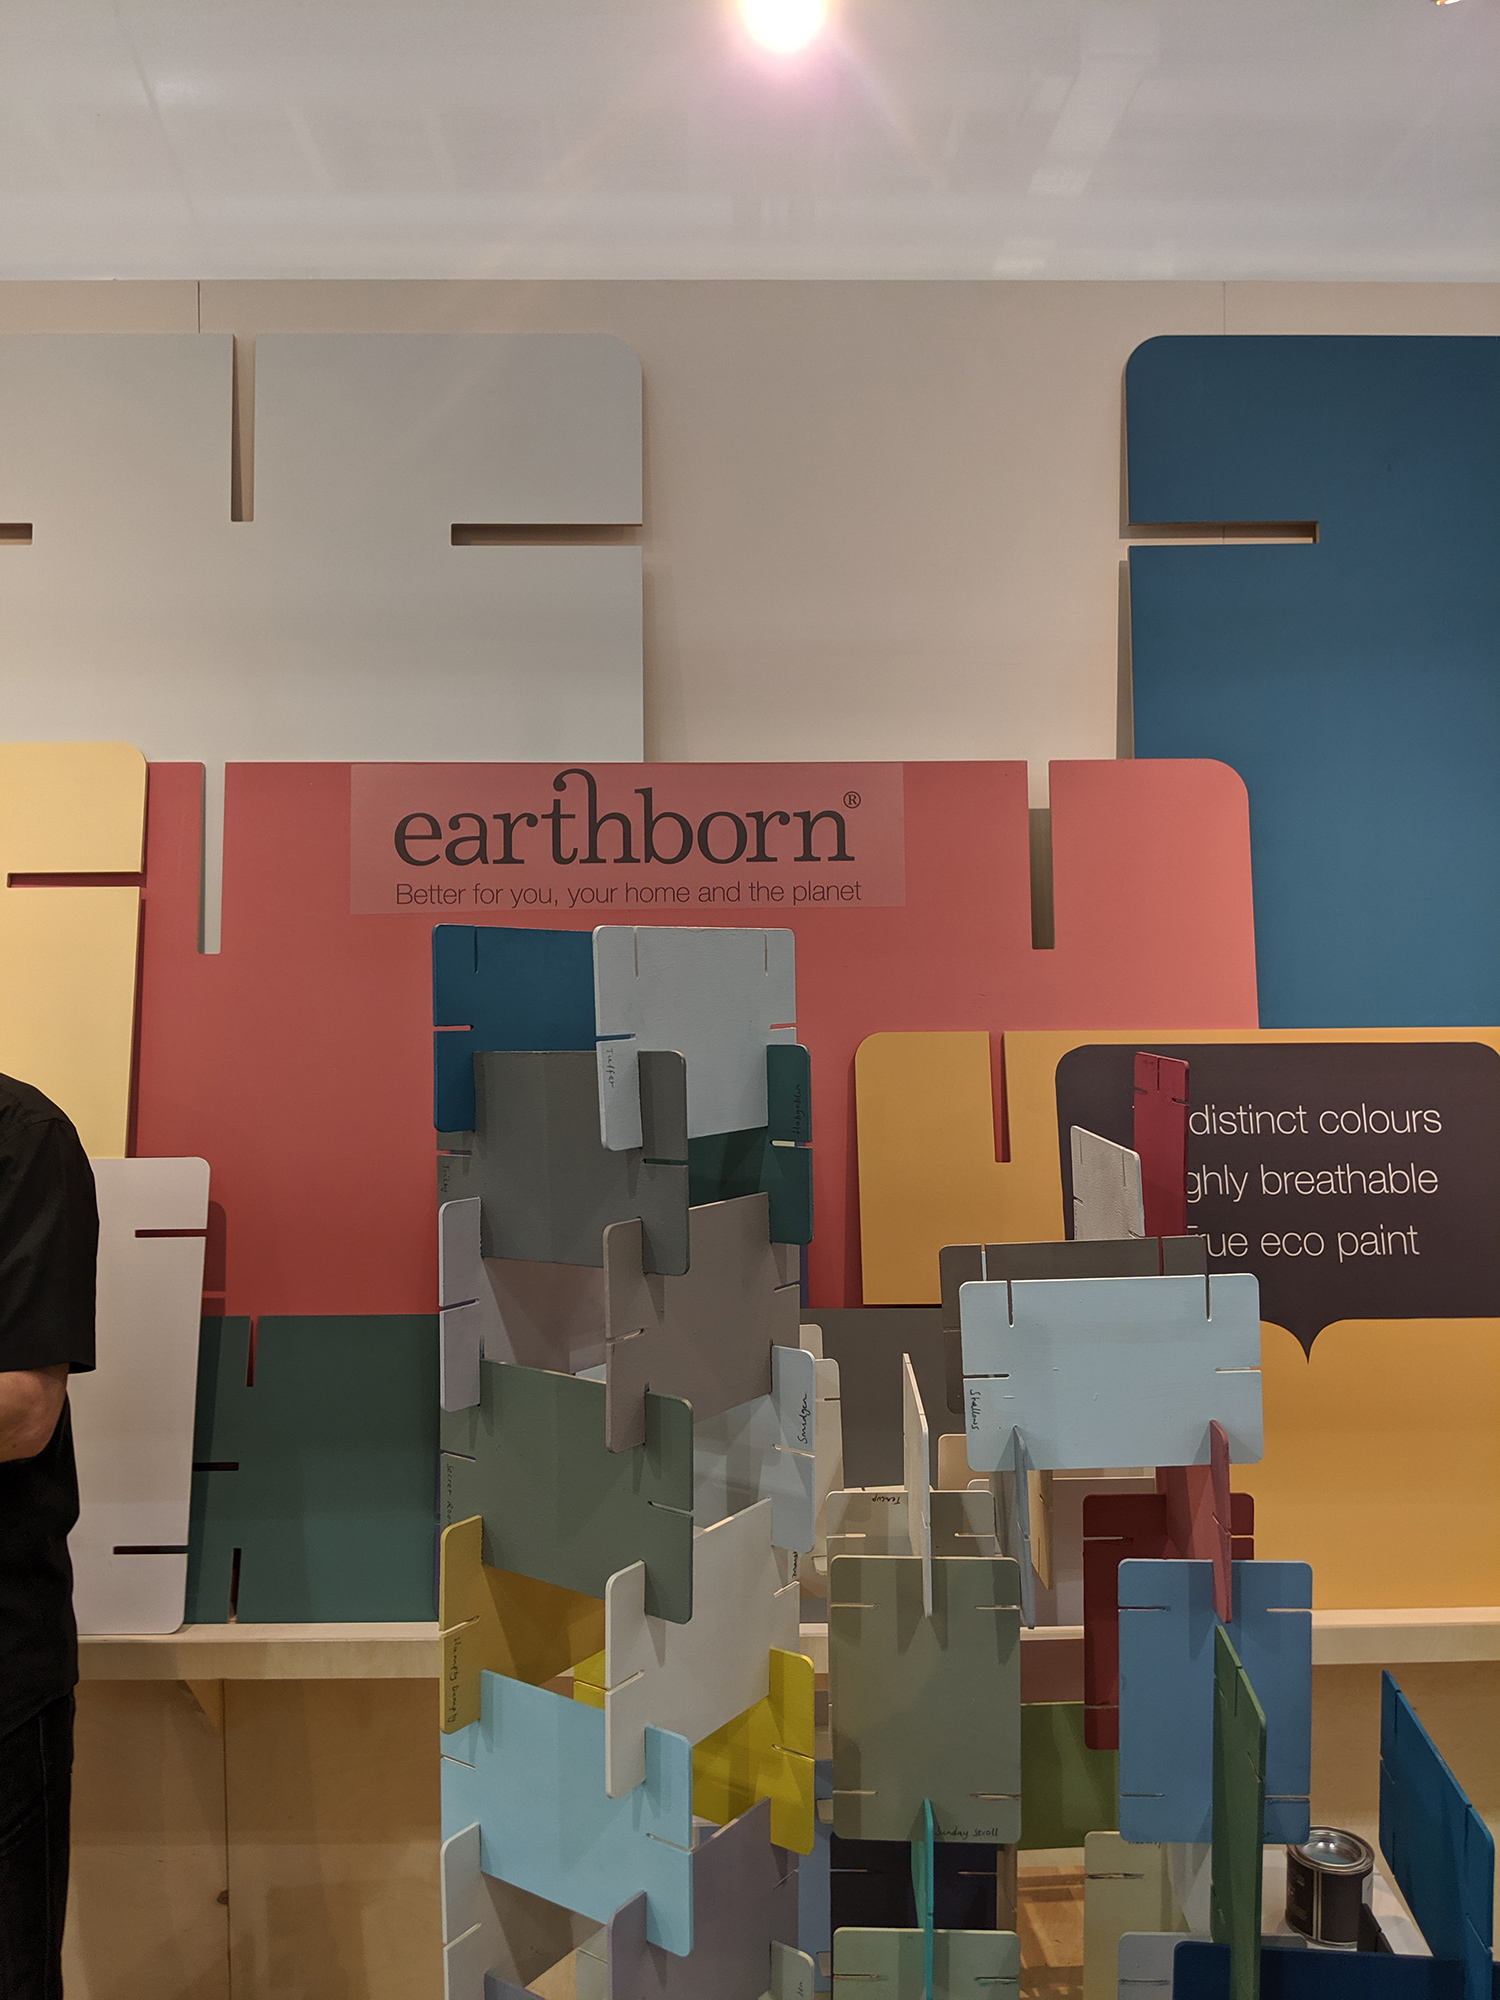 The Earthborn UK stand who have been producing environmentally sound paints since 2002.